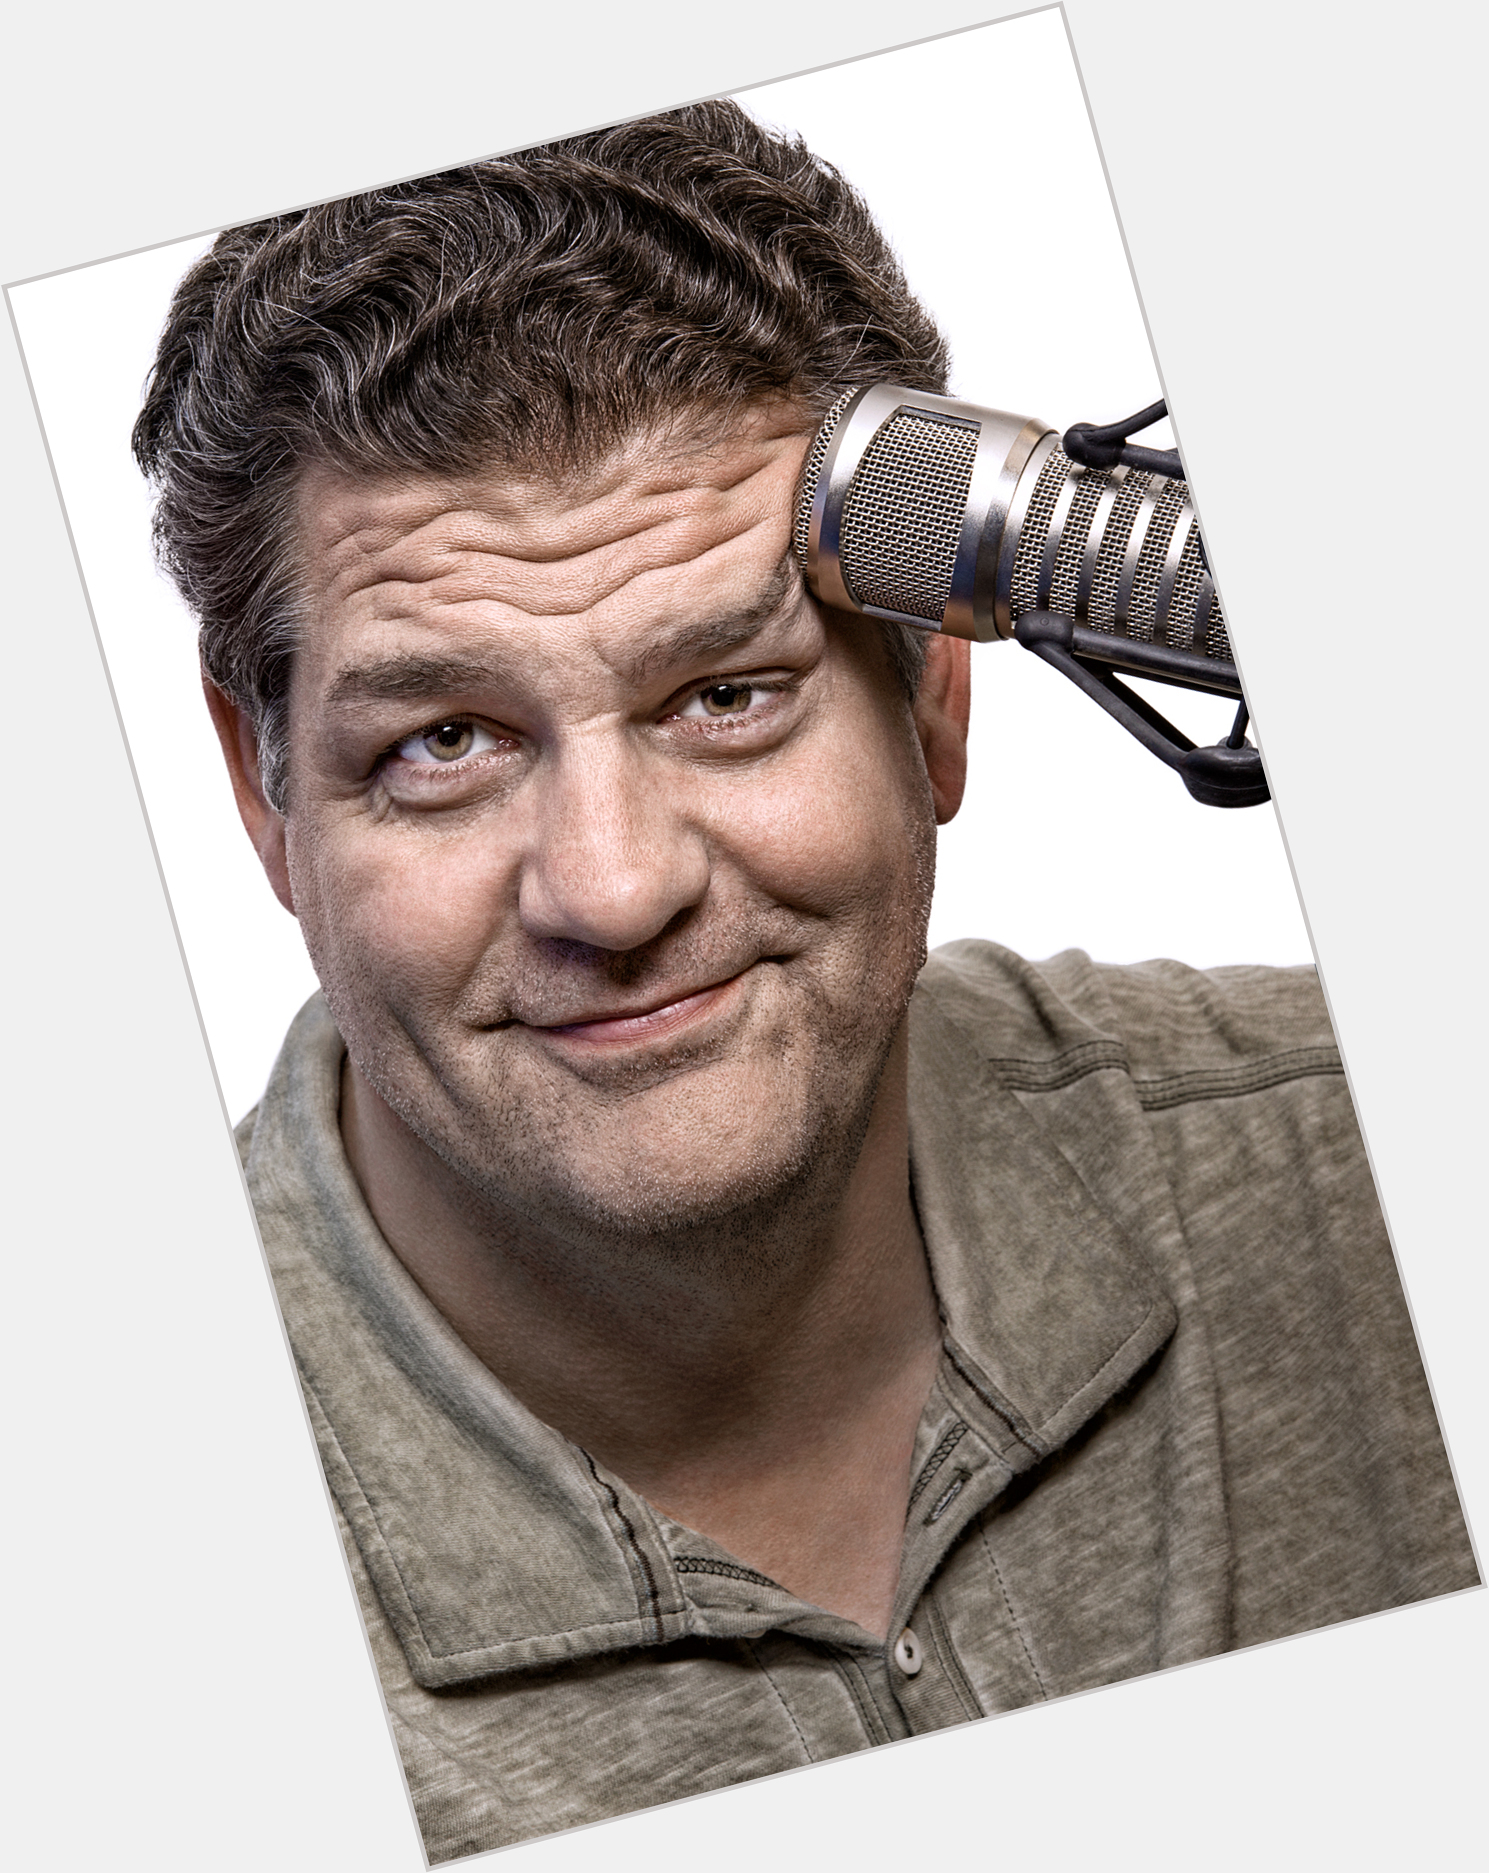 Mike Golic dating 2